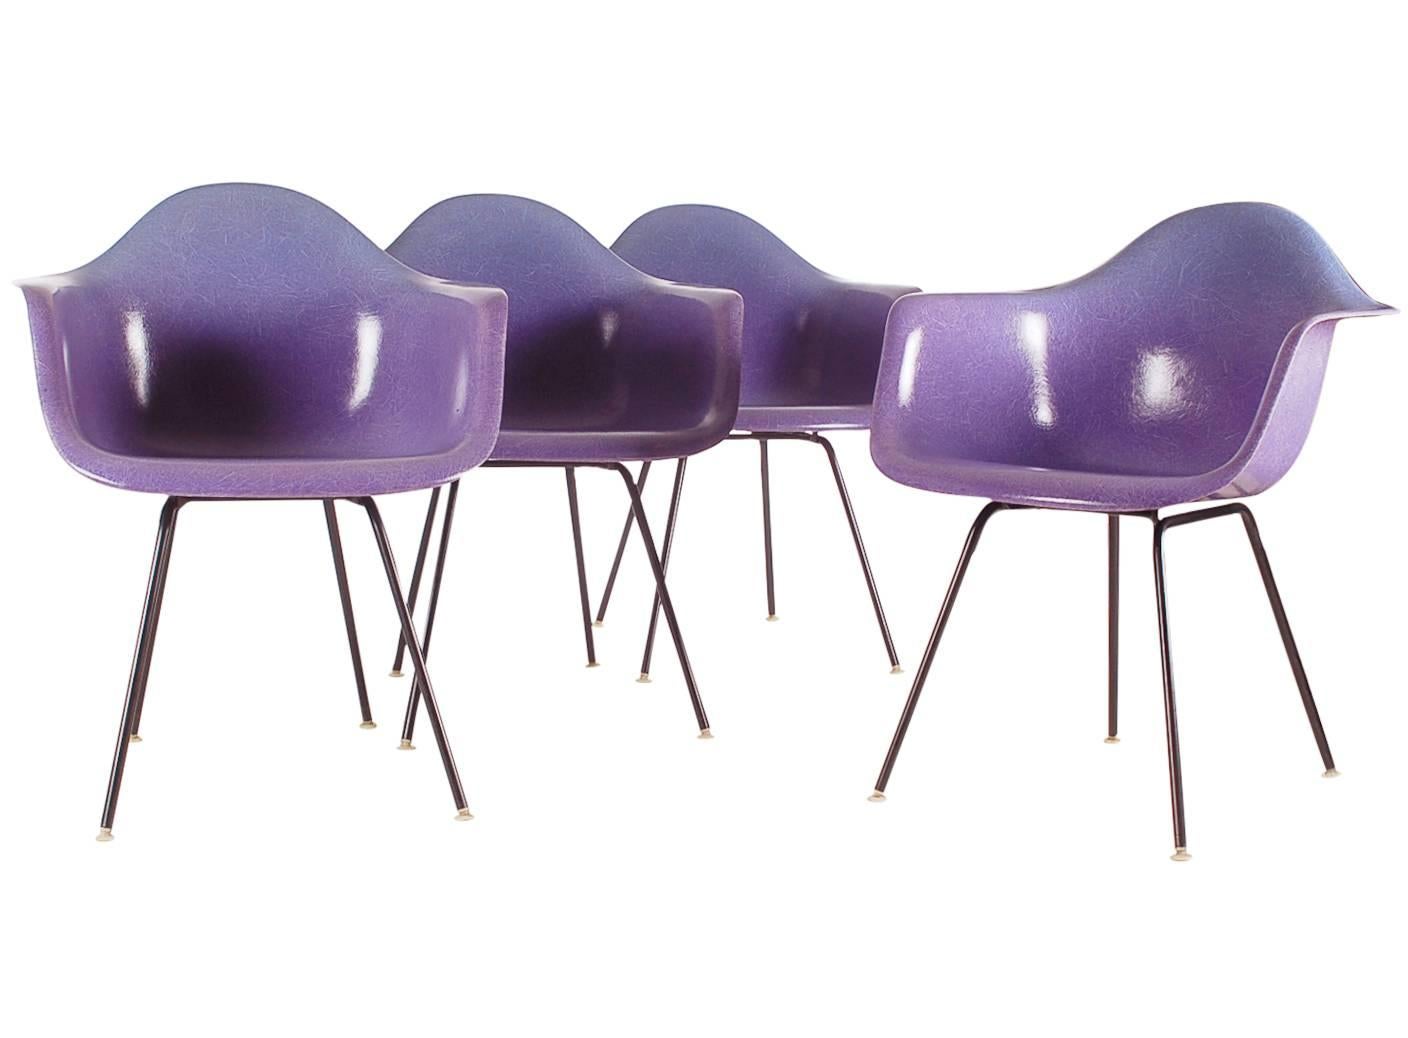 Purple is known to be the rarest color to collectors worldwide. Here we have a matching set of four vintage arm shells produced by Herman Miller in the early 1970s. Embossed logo and paper label to each.